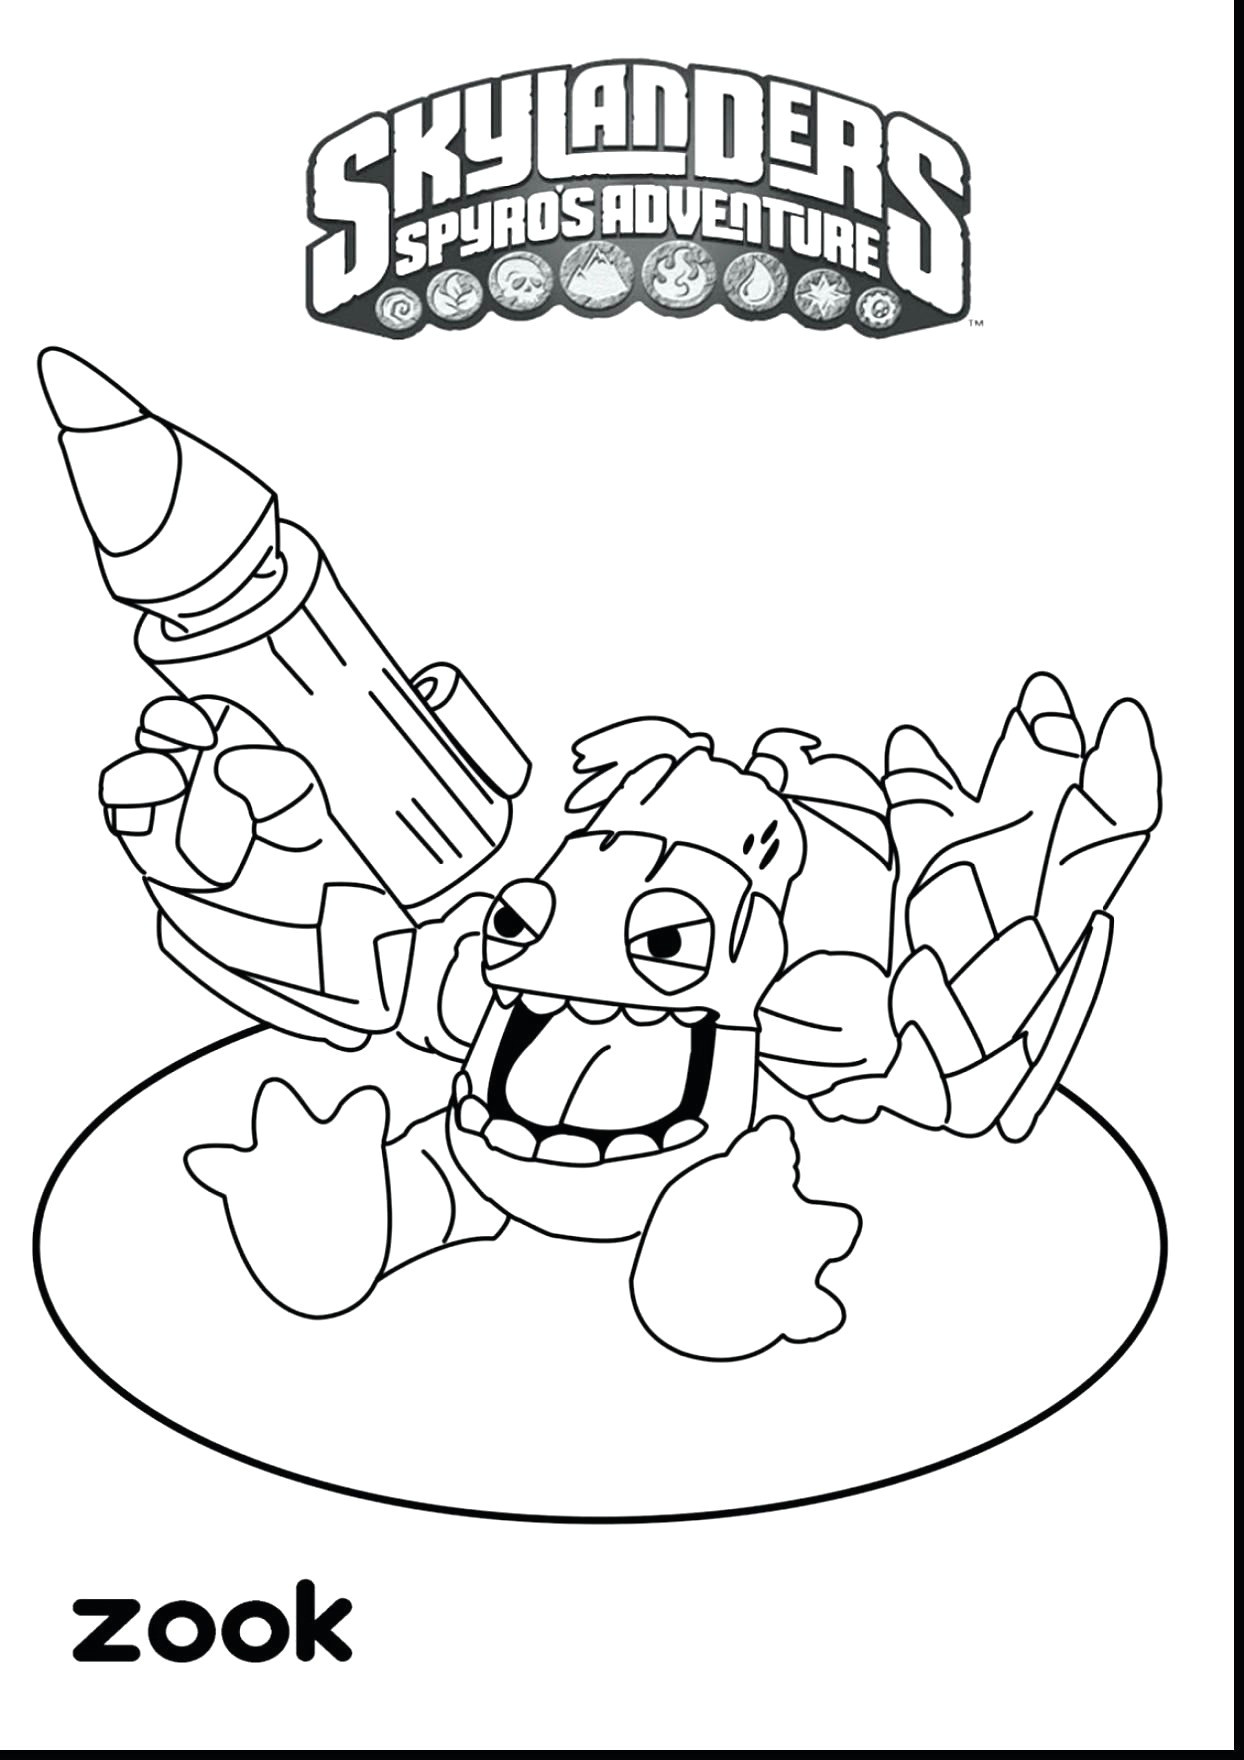 Easy Drawings In Color Easy to Draw Instruments Home Coloring Pages Best Color Sheet 0d